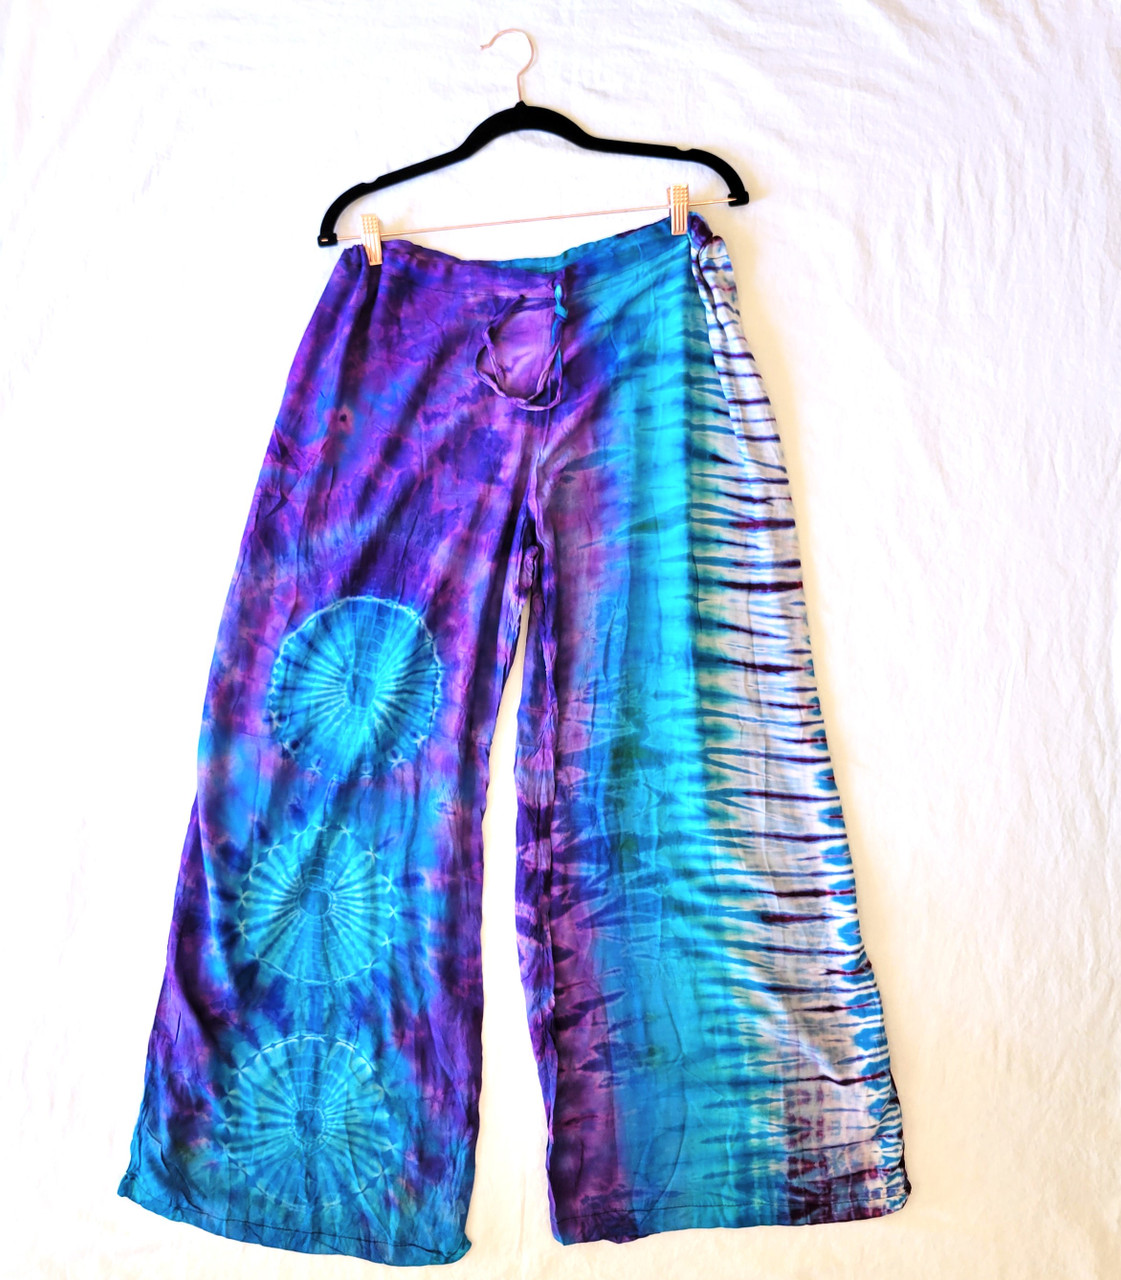 Jewel Tone Tie Dye Rayon Drawstring Pant from Thailand - The Silk Road ...